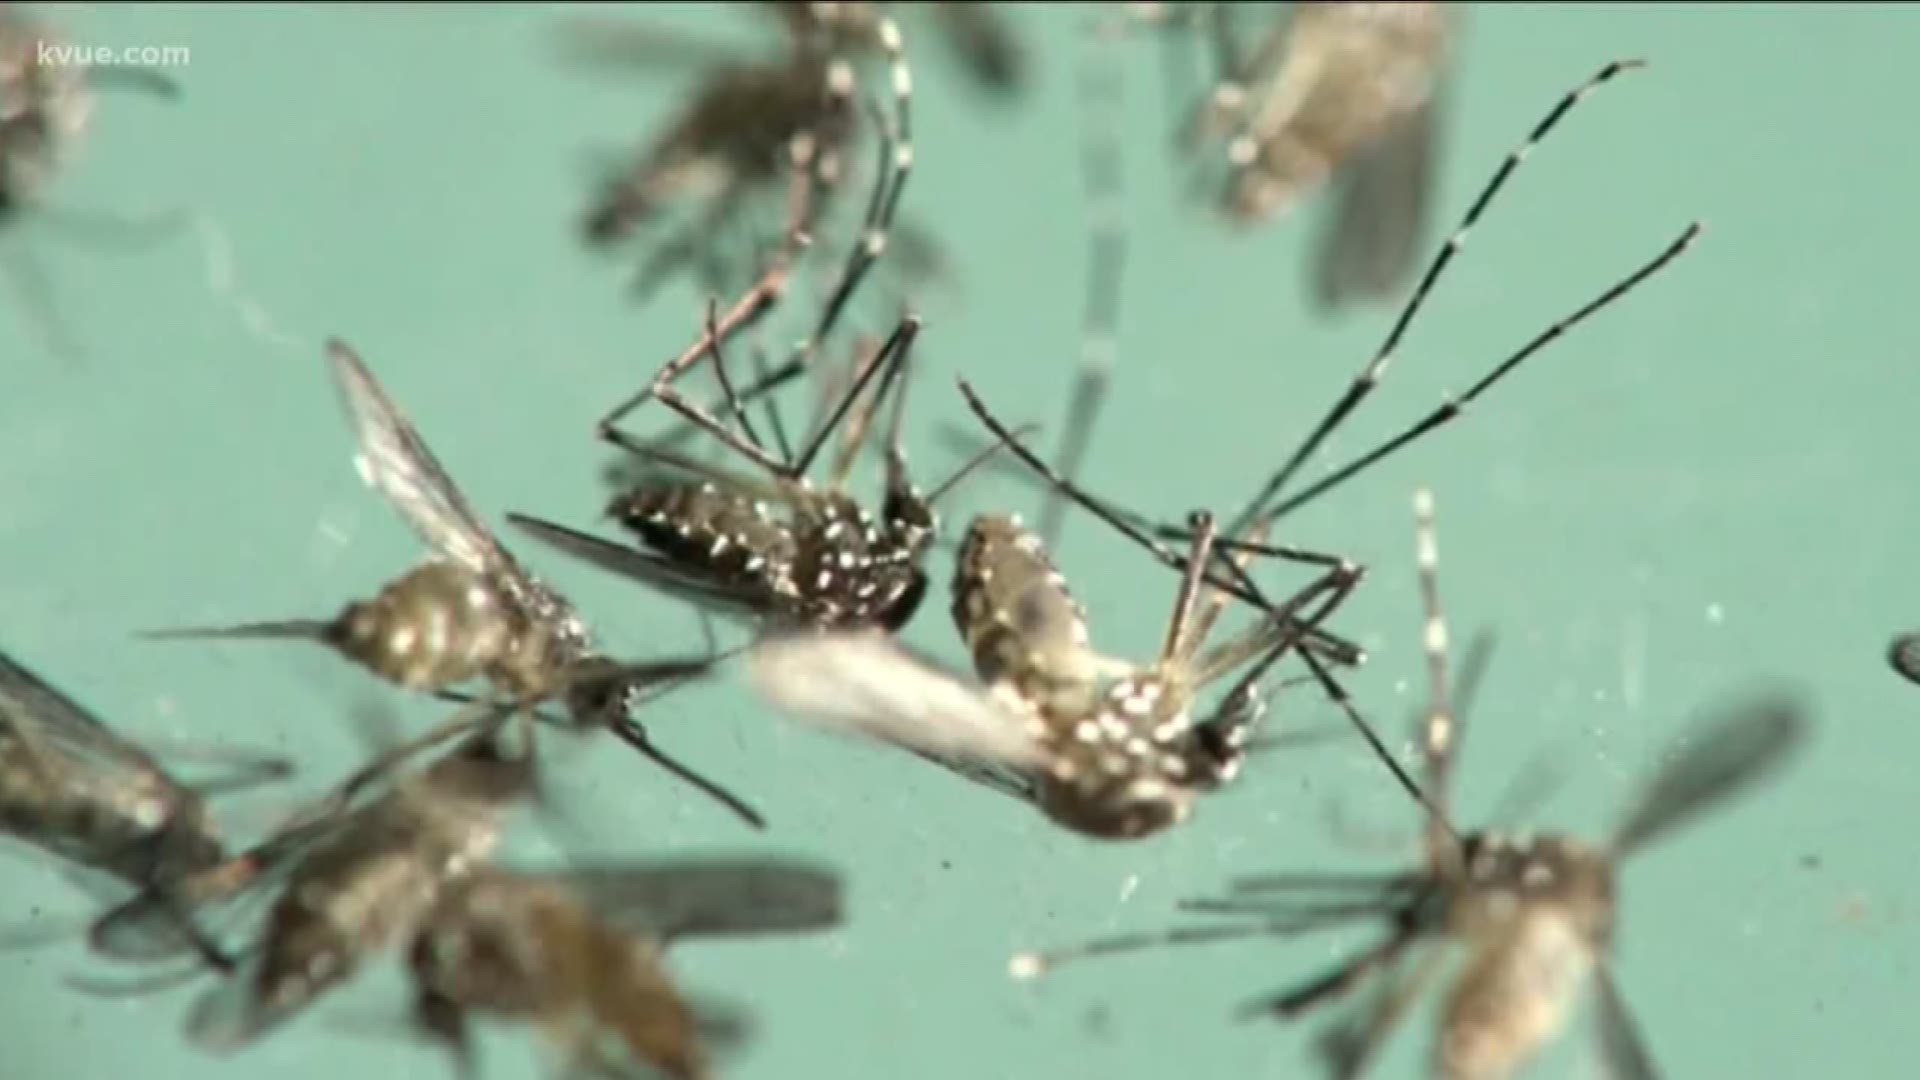 Mosquitos can be difficult to kill. Just because you don't see them in the cold, doesn't mean they're gone. KVUE's Rebeca Trejo tells us what you should look out for as more cold weather approaches.